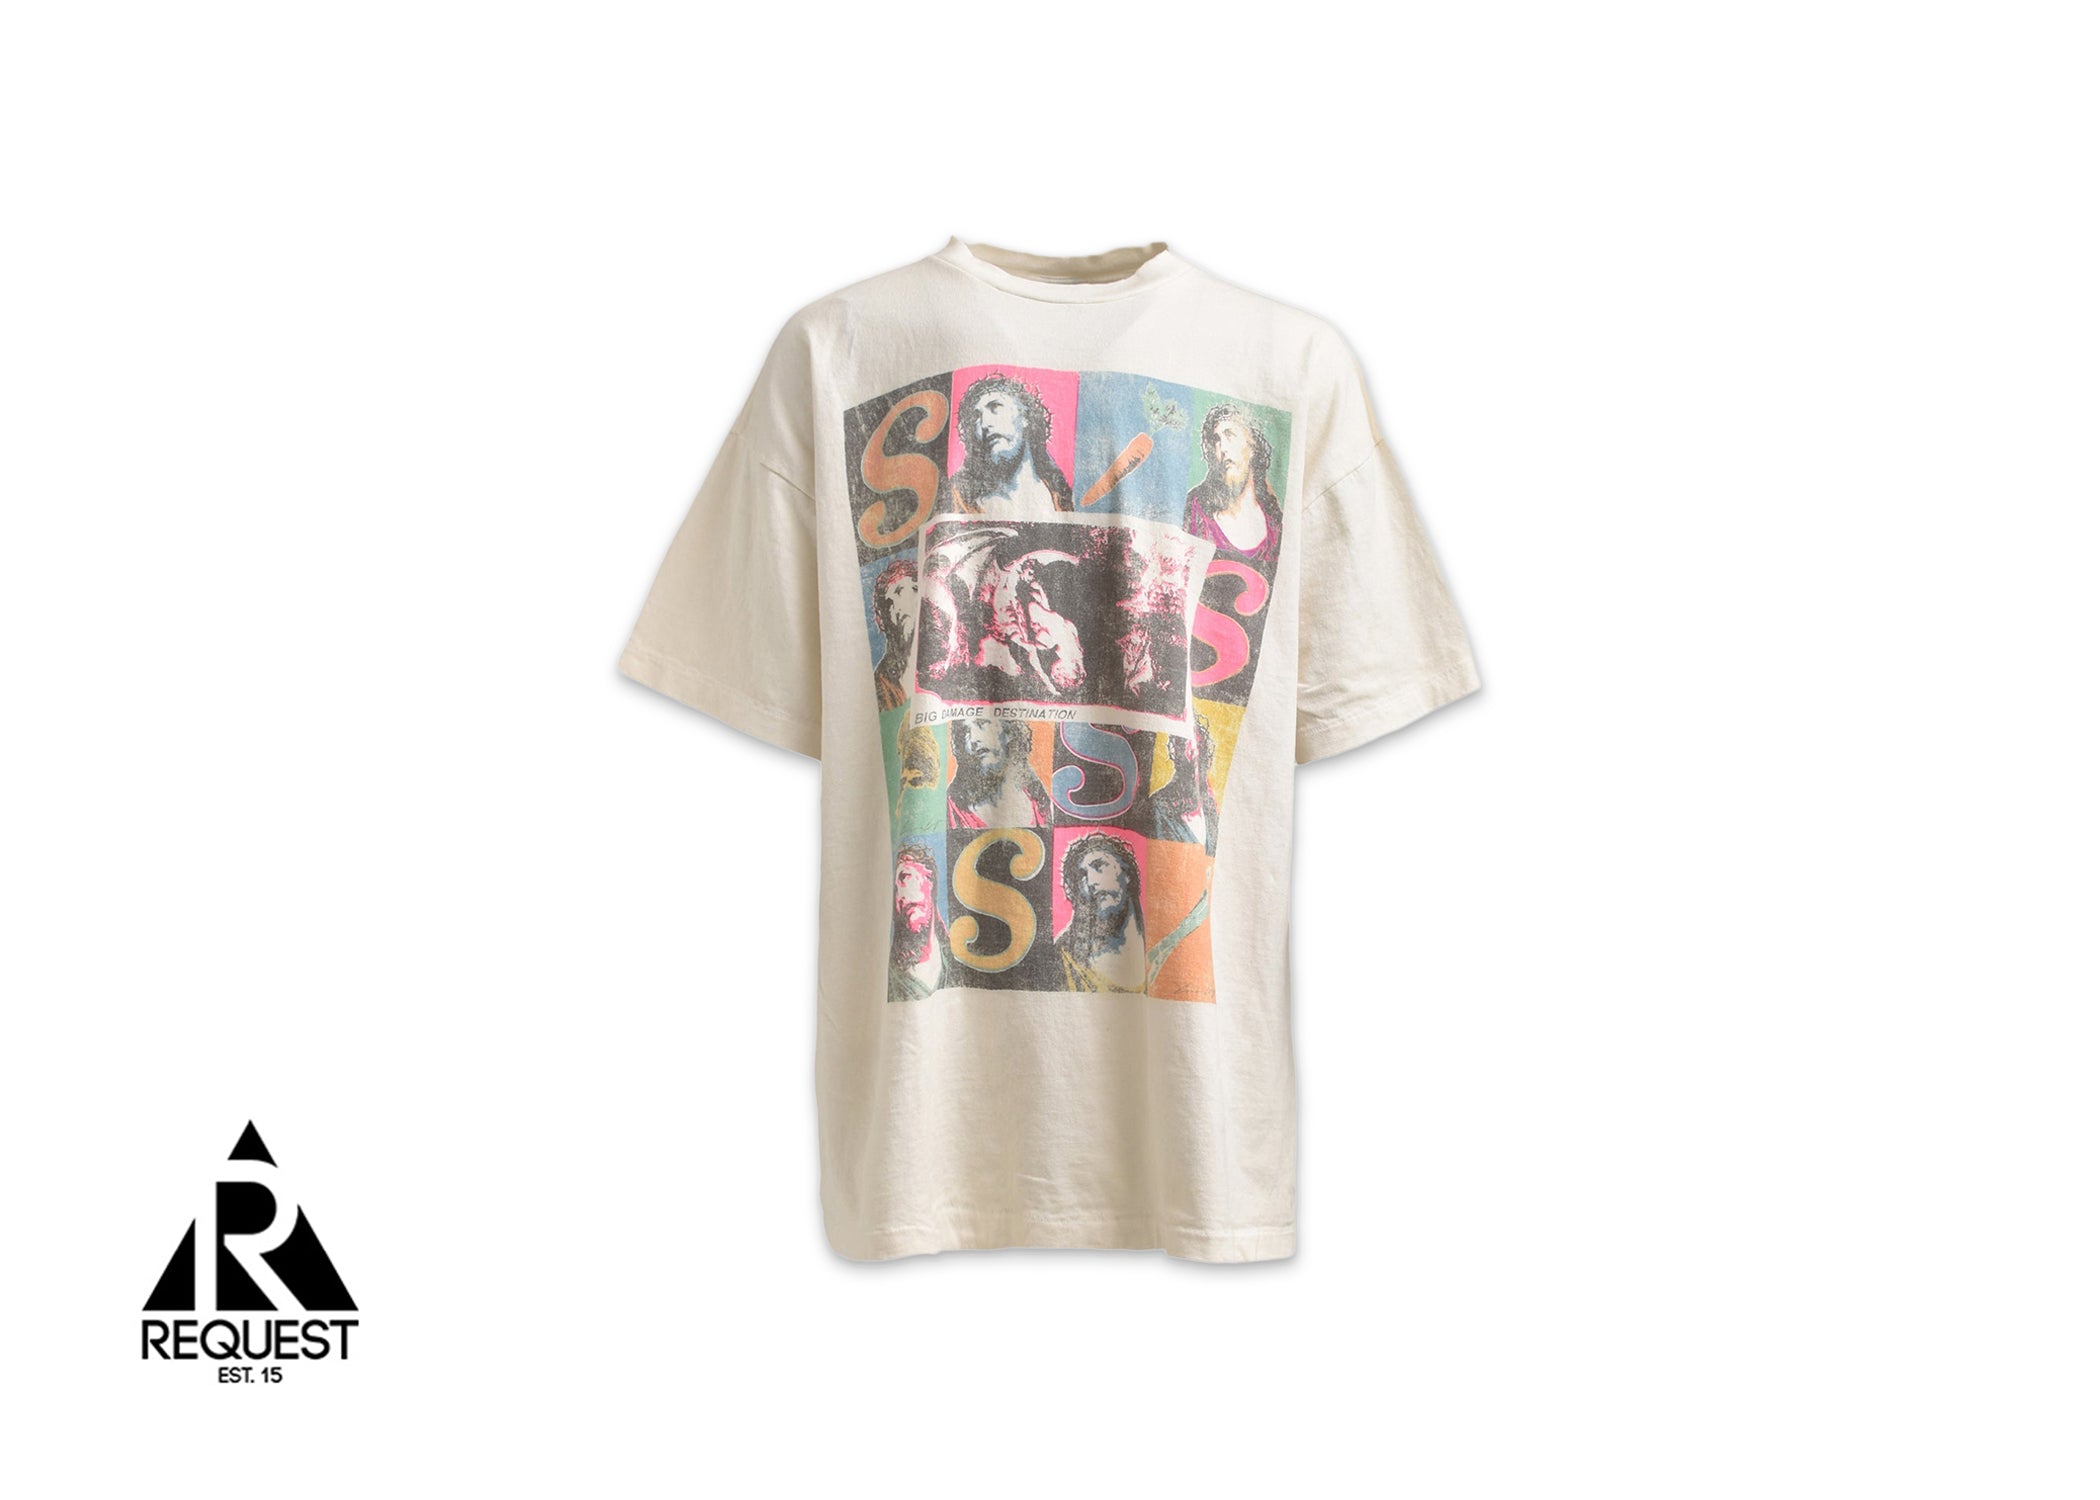 Saint Michael x Sean Wotherspoon Veges Tee "White"